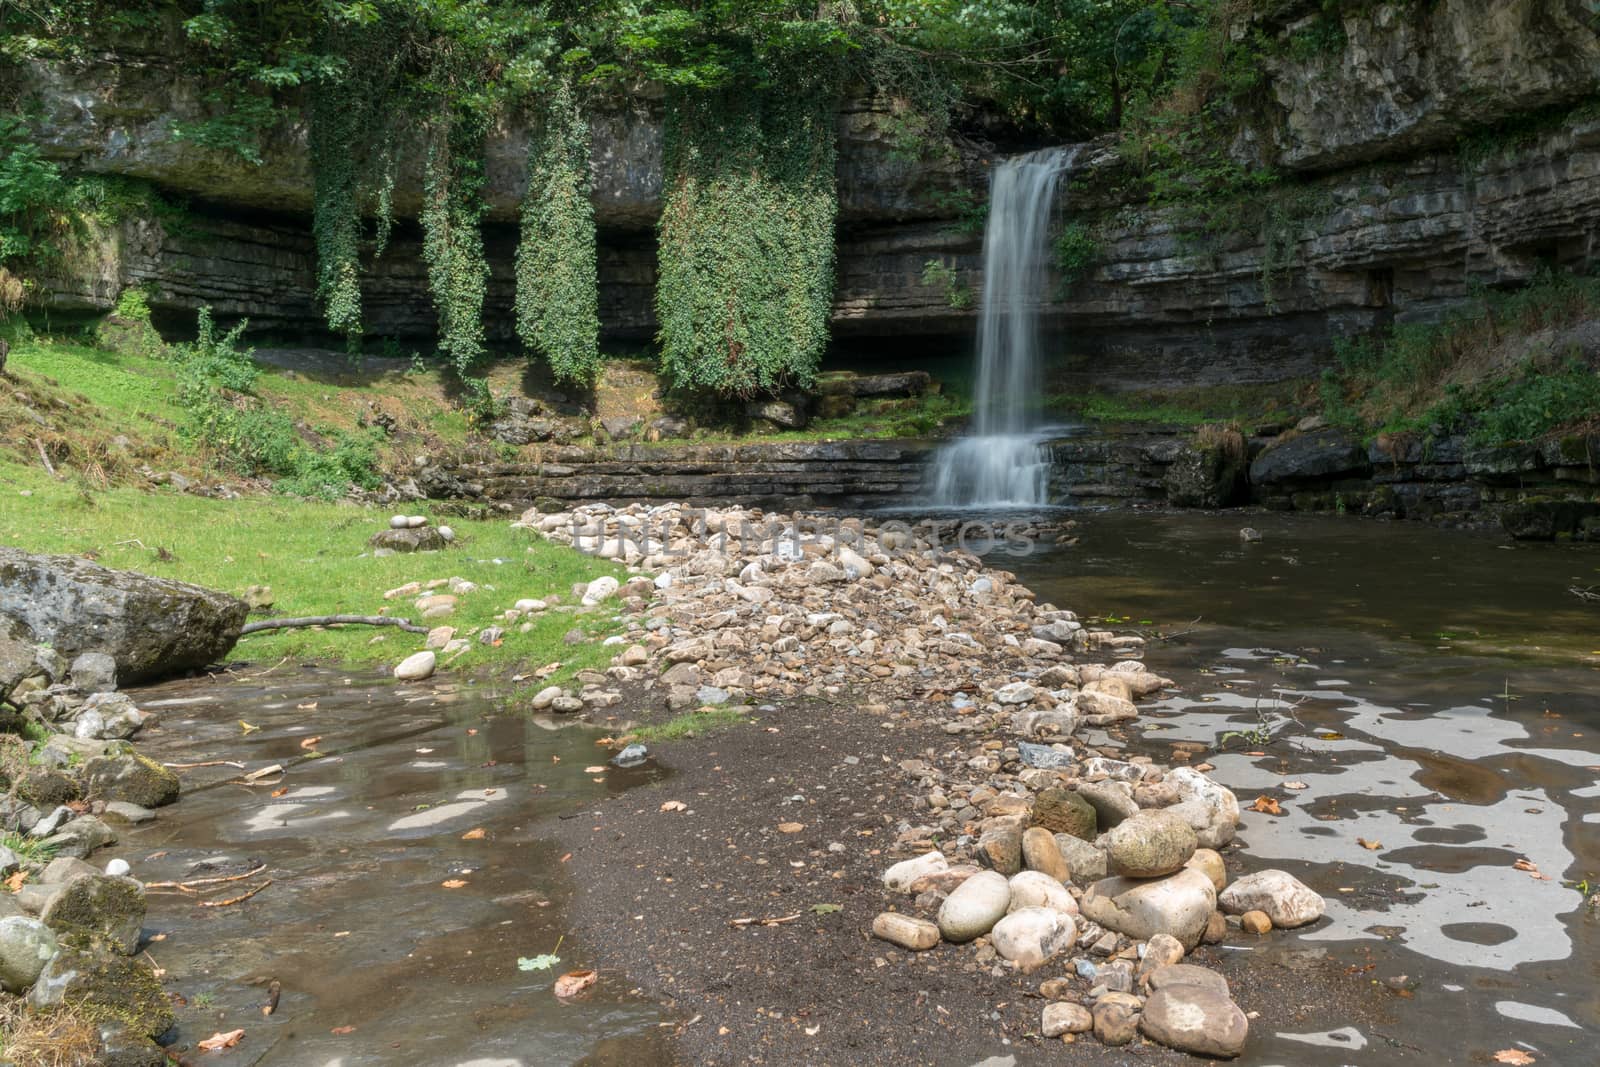 View of Askrigg Waterfall in the Yorkshire Dales National Park by phil_bird